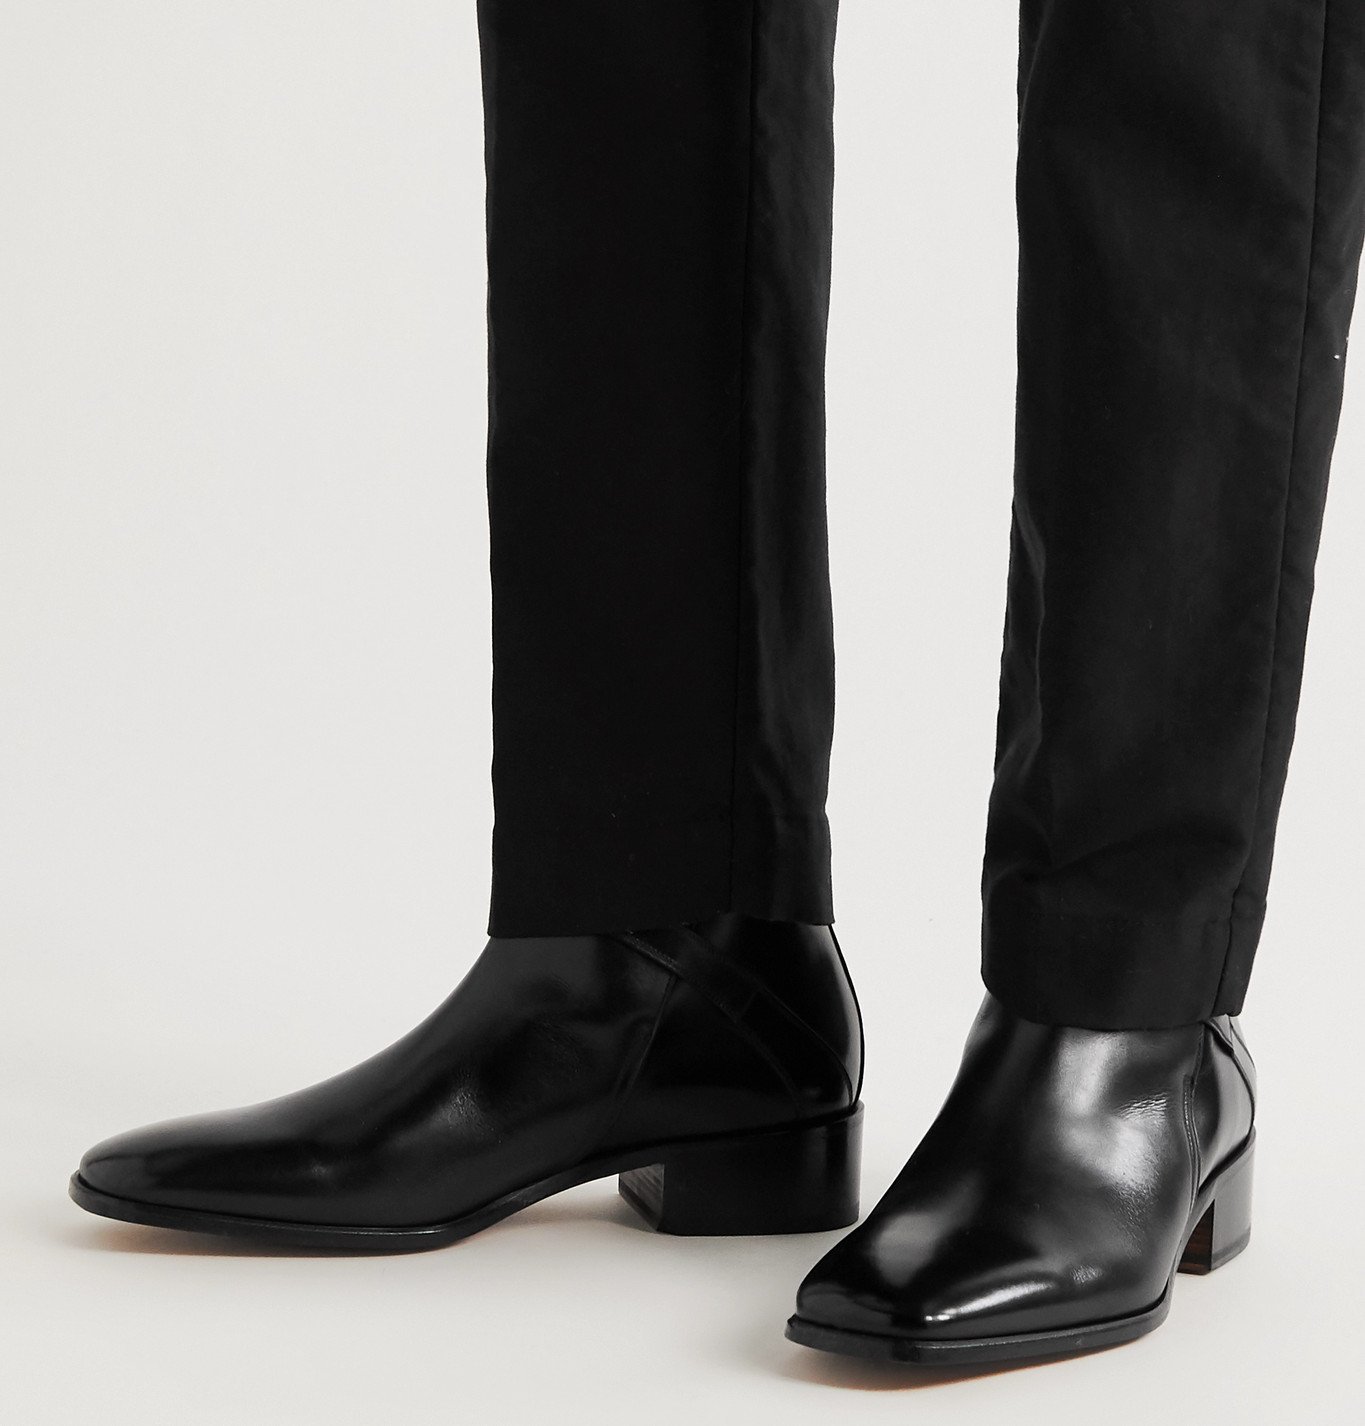 TOM FORD - Rochester Leather Chelsea Boots - Black TOM FORD